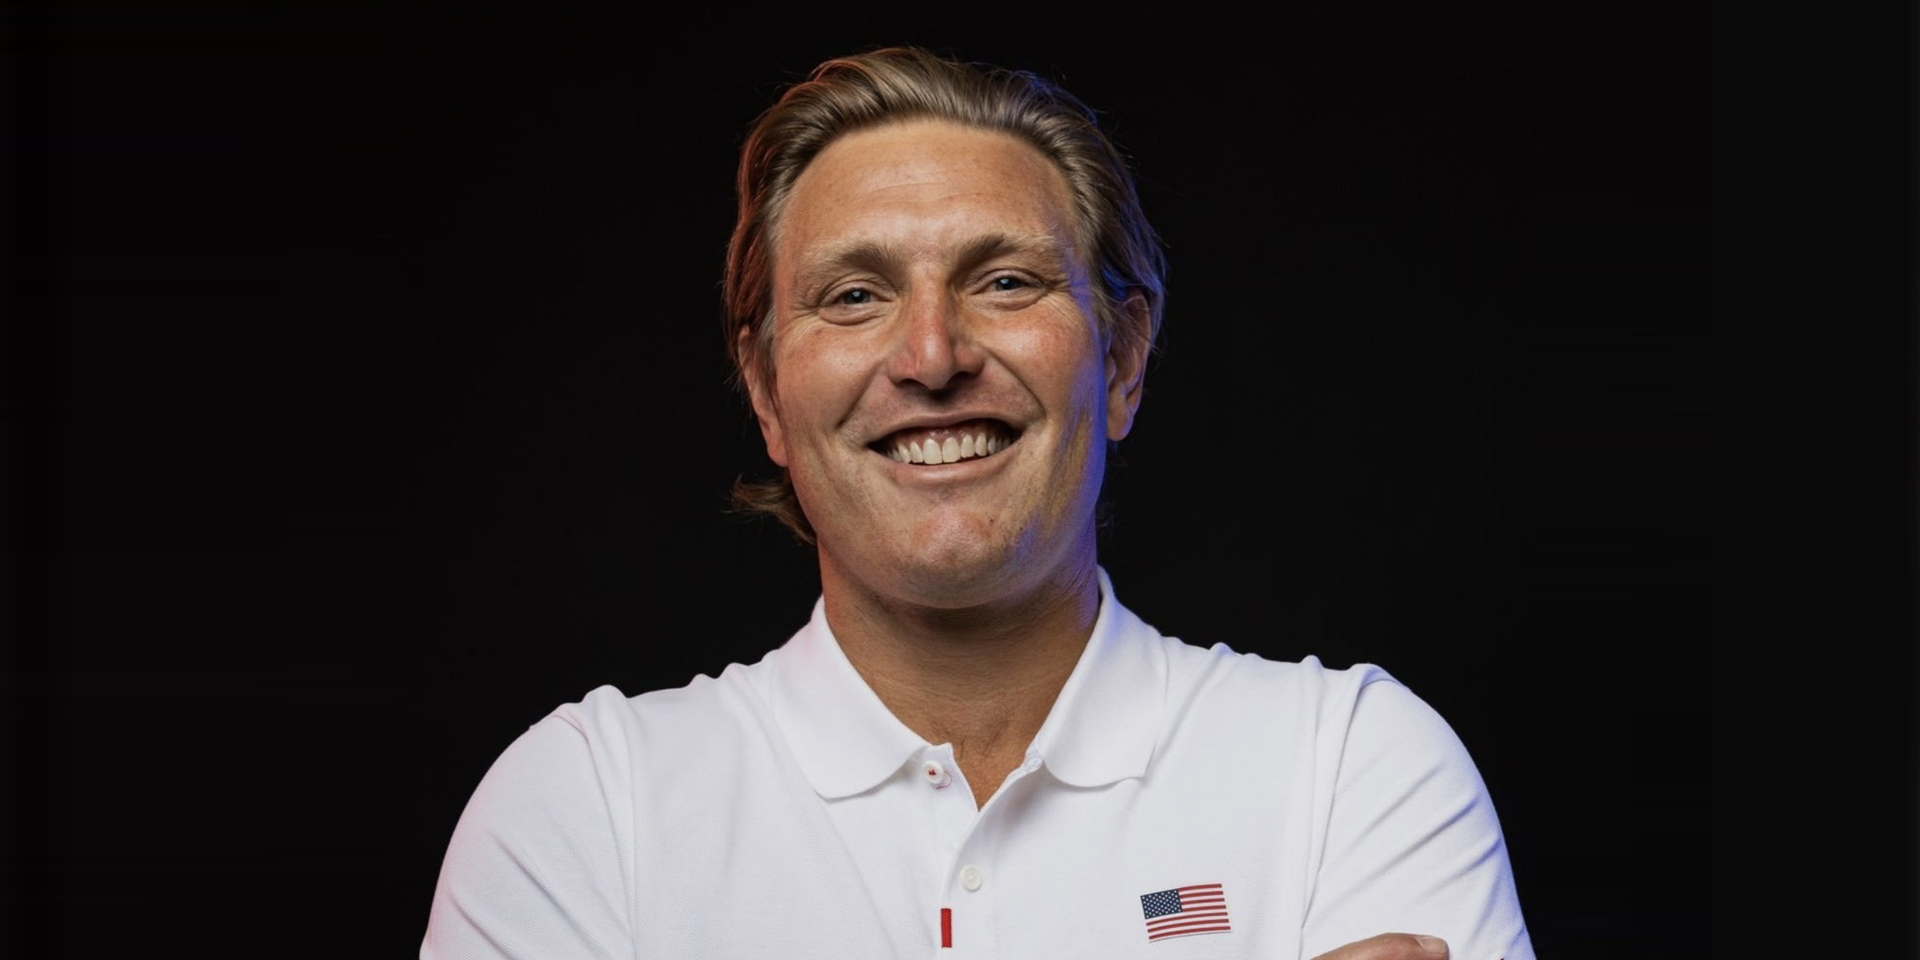 Jesse Smith, five-time olympian, a silver medalist at the London Olympics, and the former Captain of the US Water Polo Team